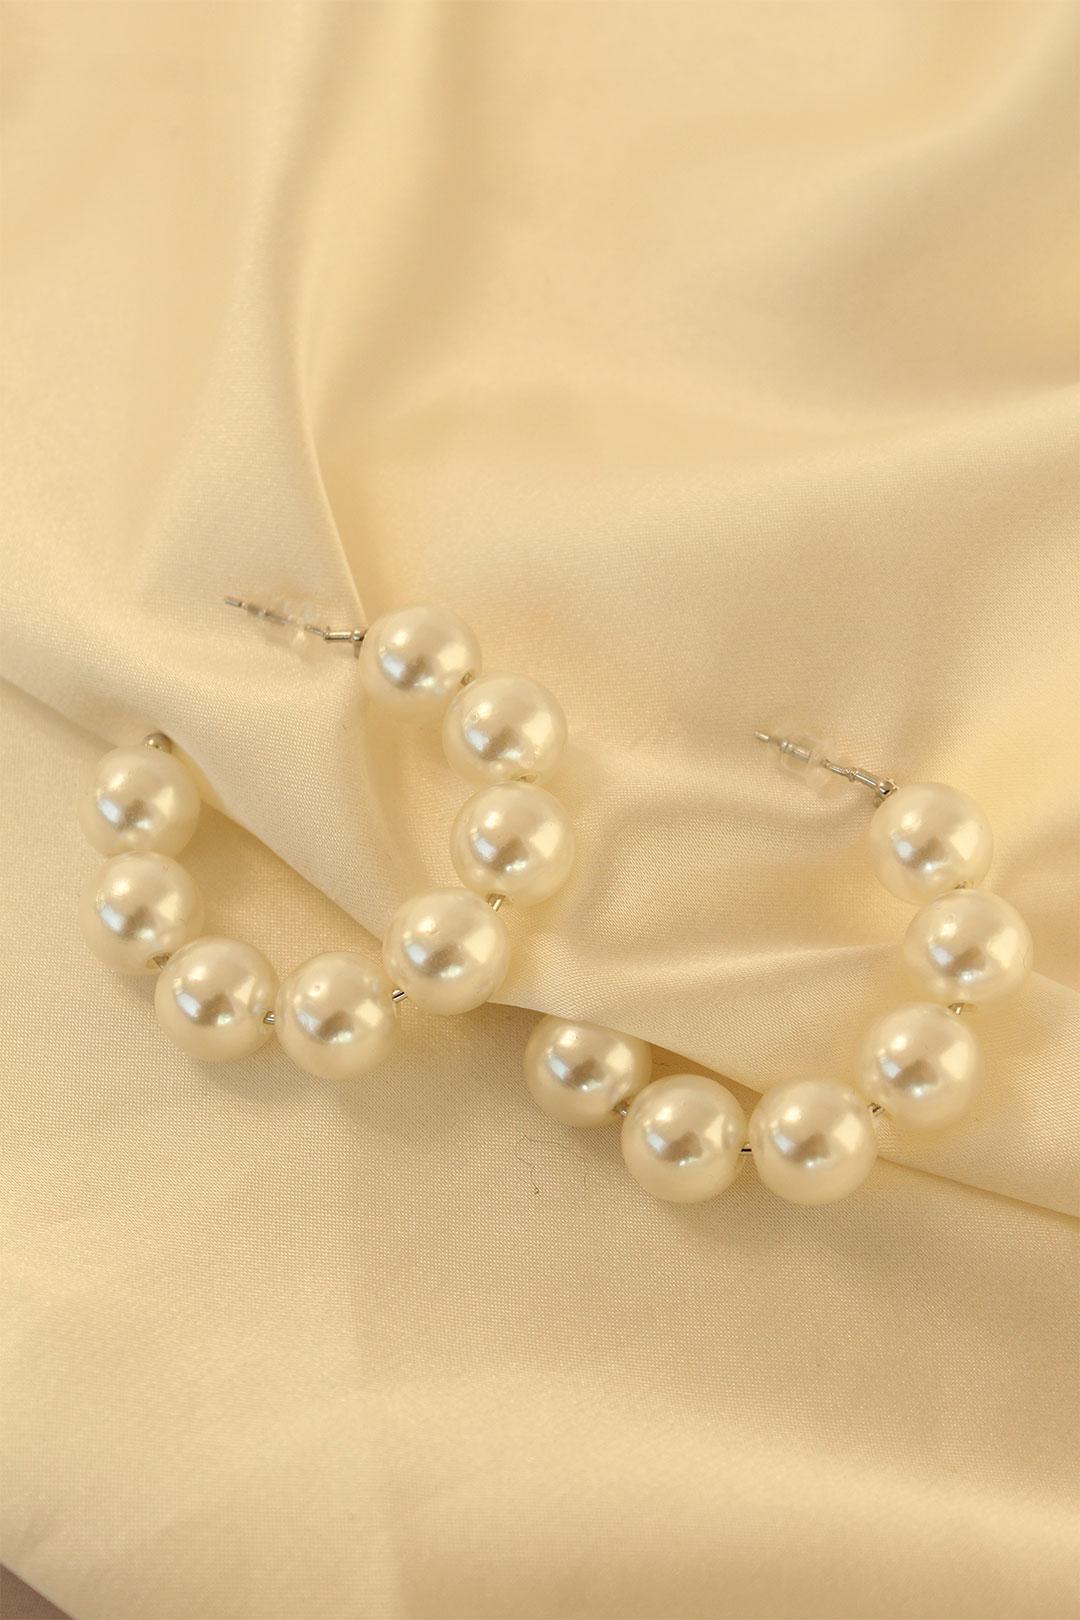 A wholesale clothing model wears 20698 - Earring With Pearls - White, Turkish wholesale Earring of Ebijuteri